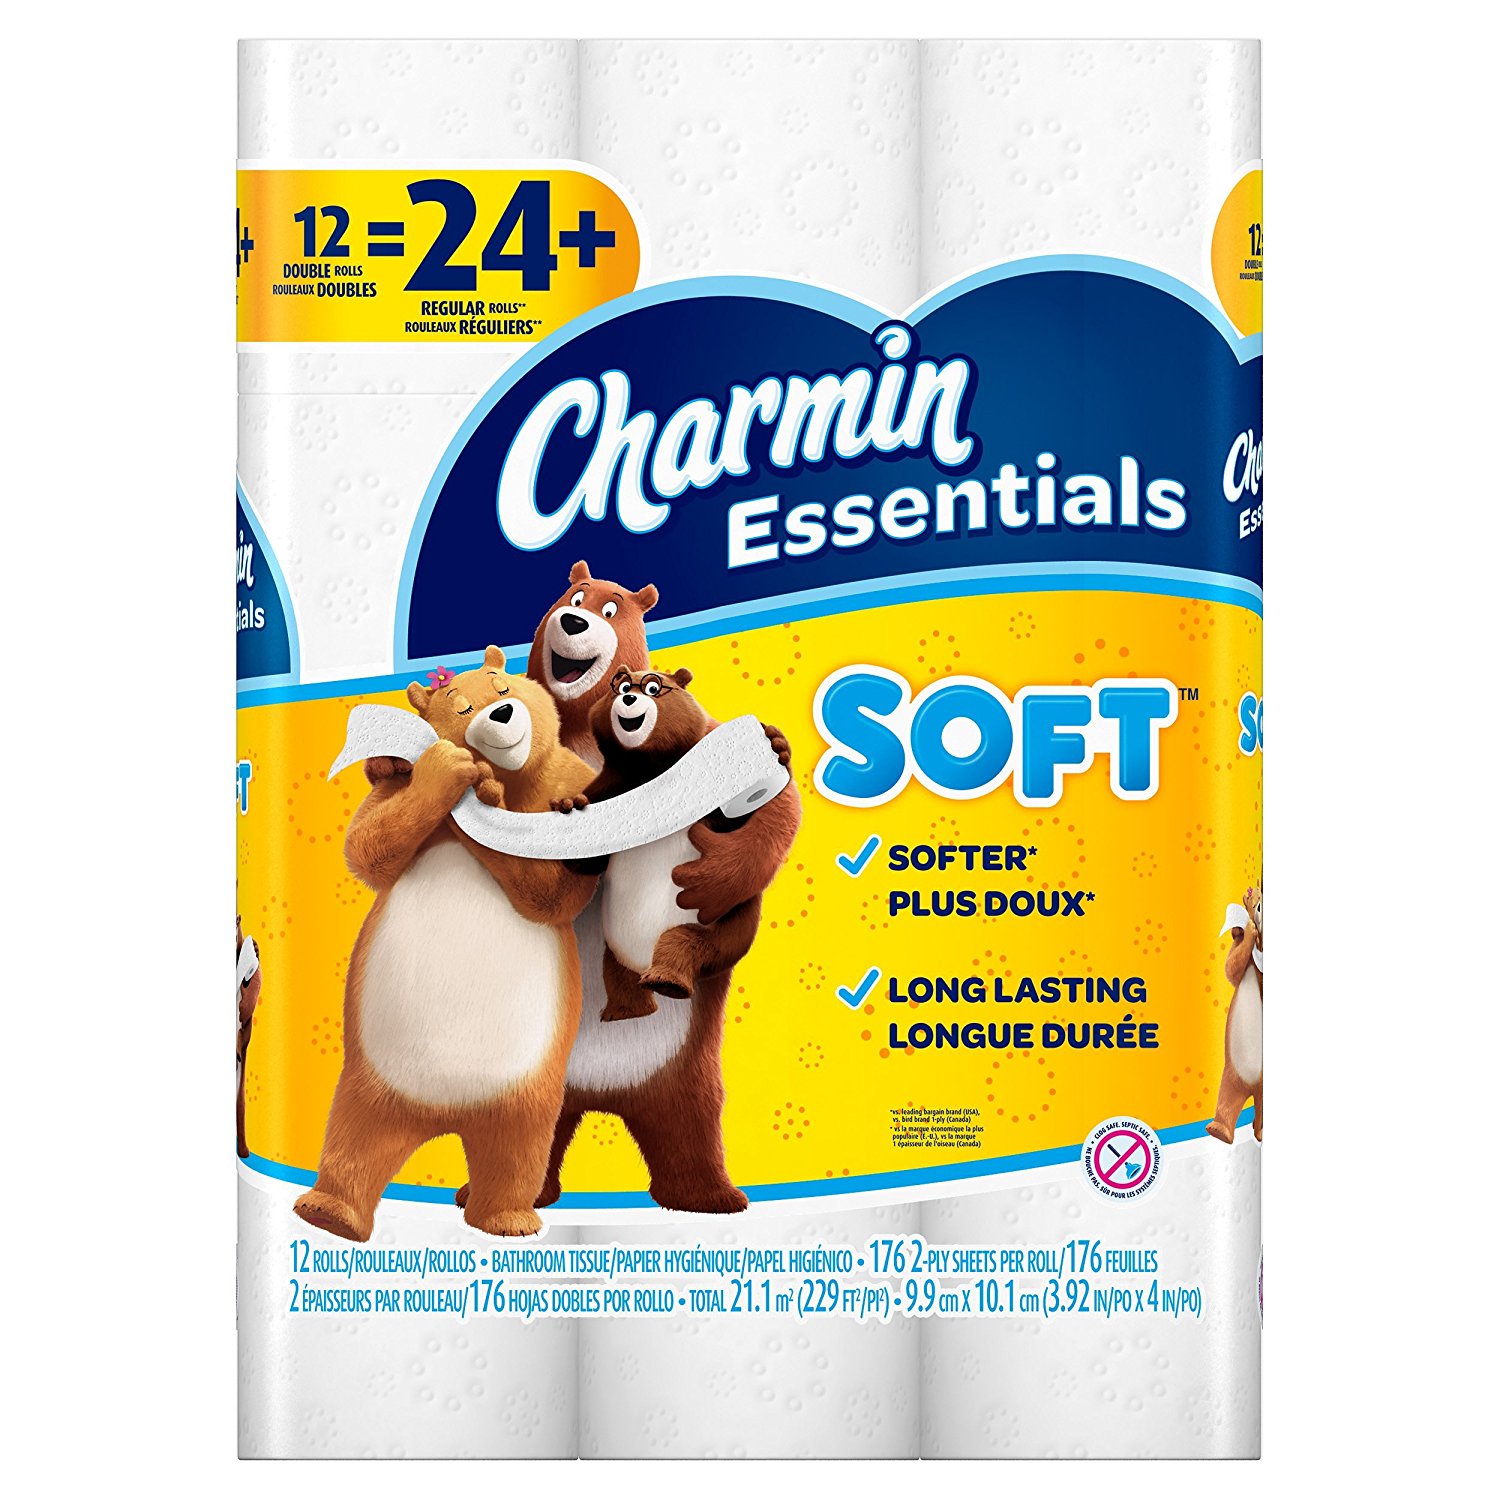 12-pack Charmin Essentials double roll toilet paper for $4